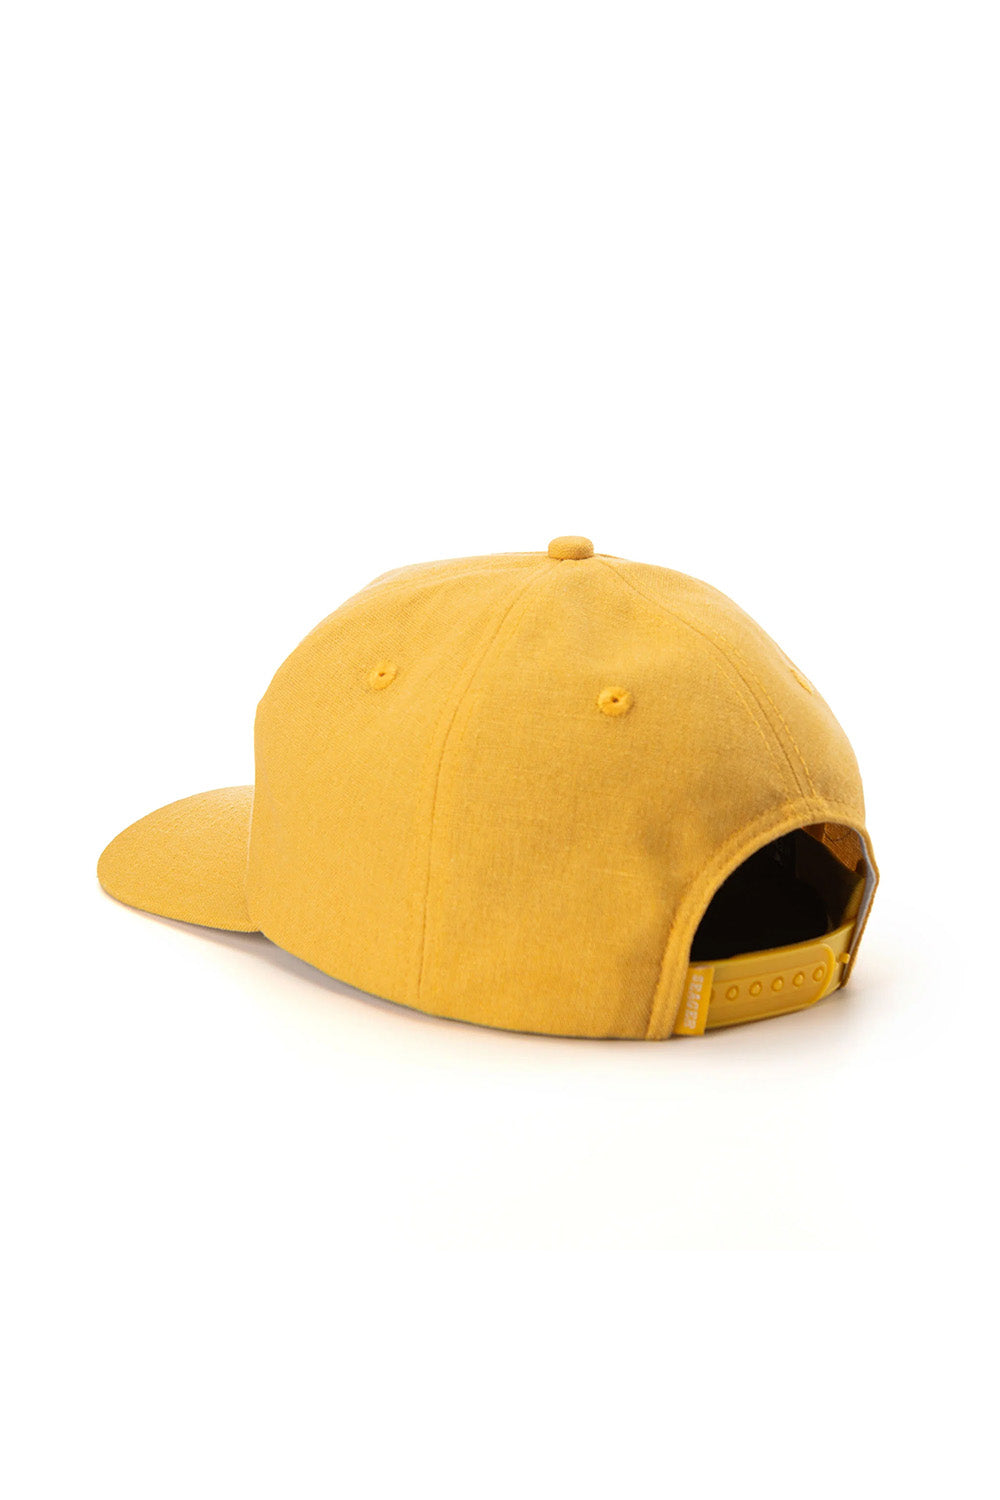 Seager - Uncle Bill Snapback - Gold - Back